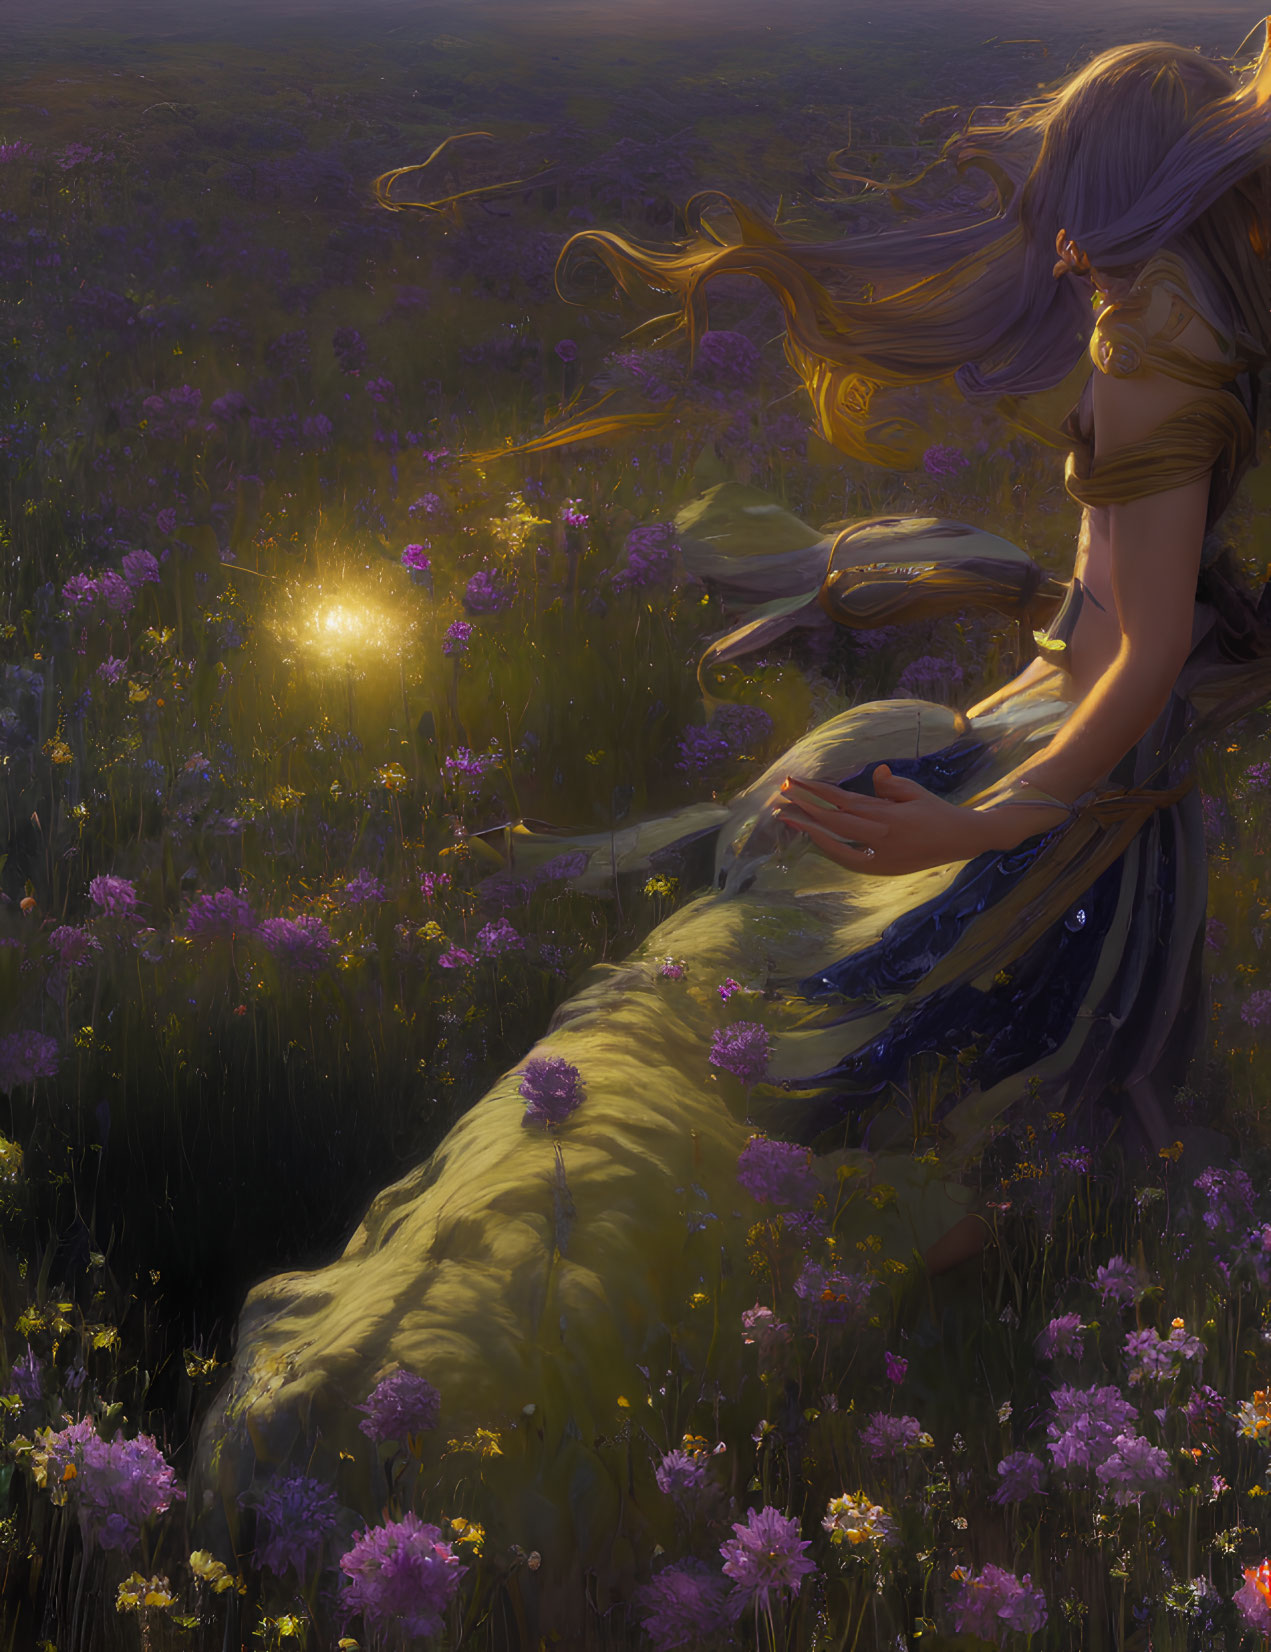 Woman with flowing hair sitting in vibrant flower field at sunset.